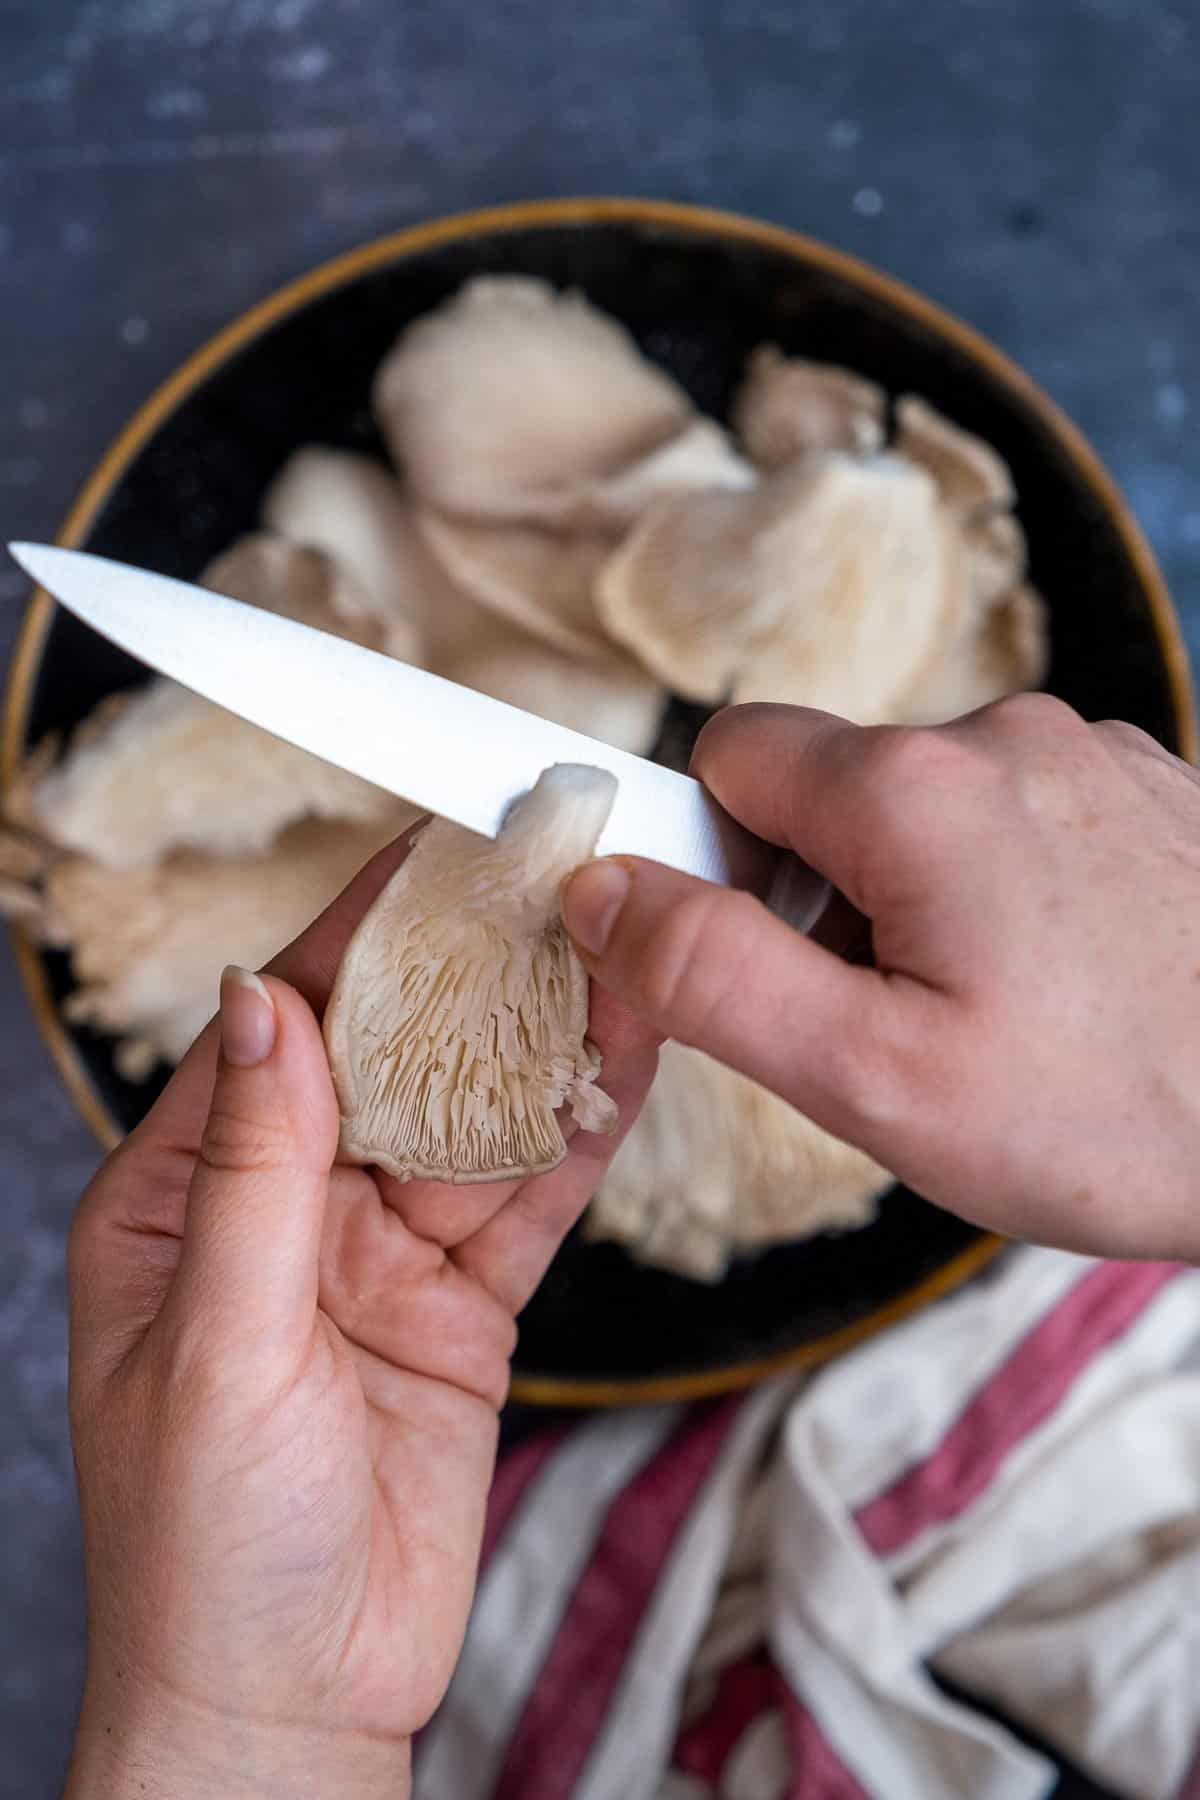 Hands cutting off the rubbery stem of oyster mushrooms with a knife.